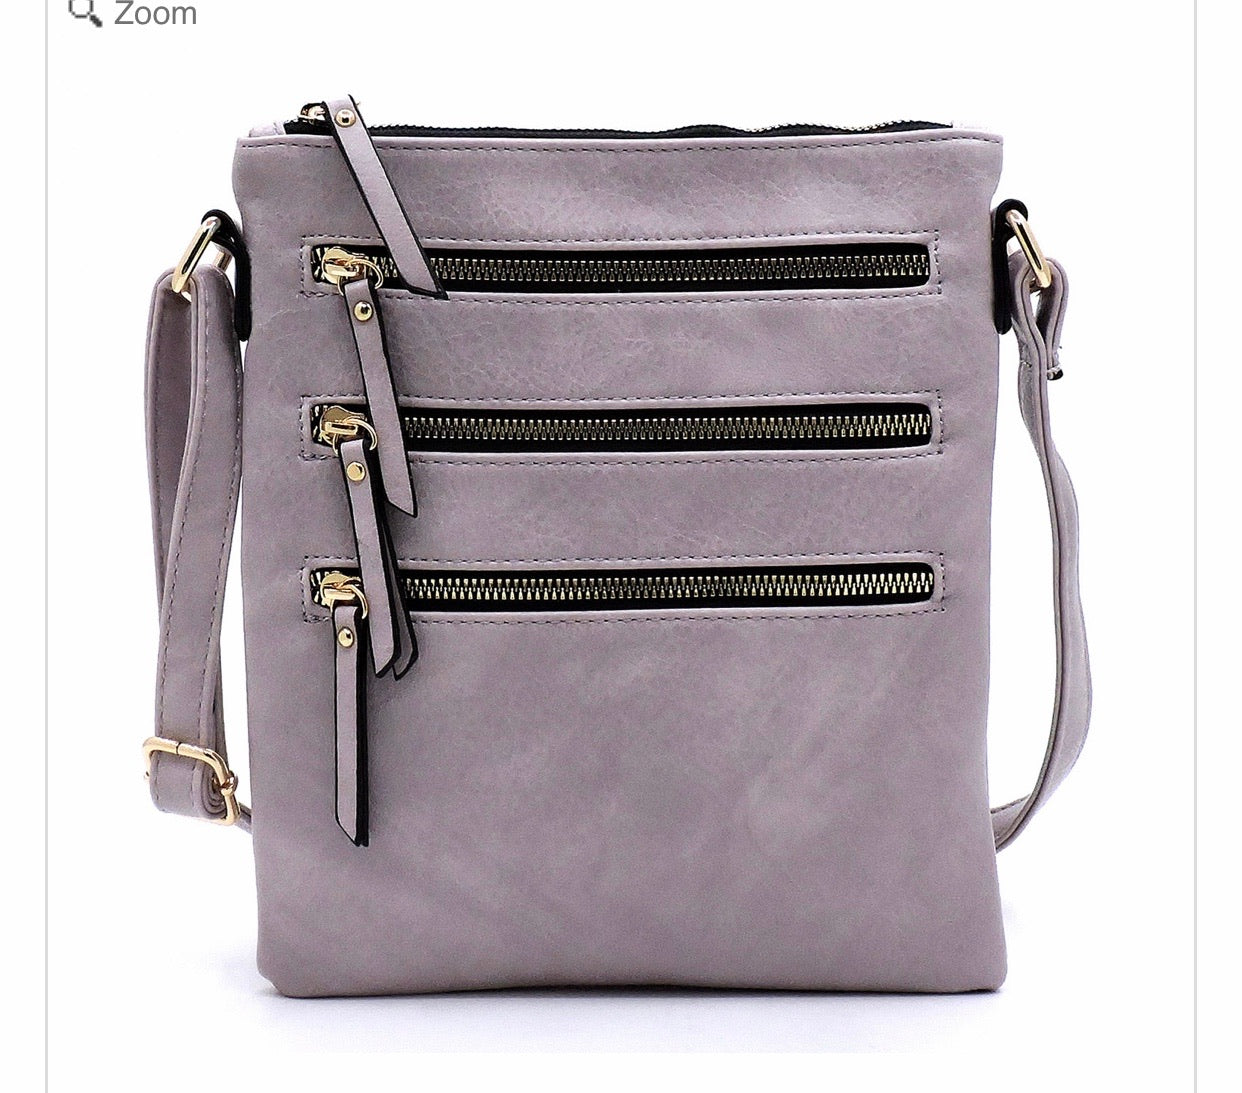 Lavender messenger with 3 zippers